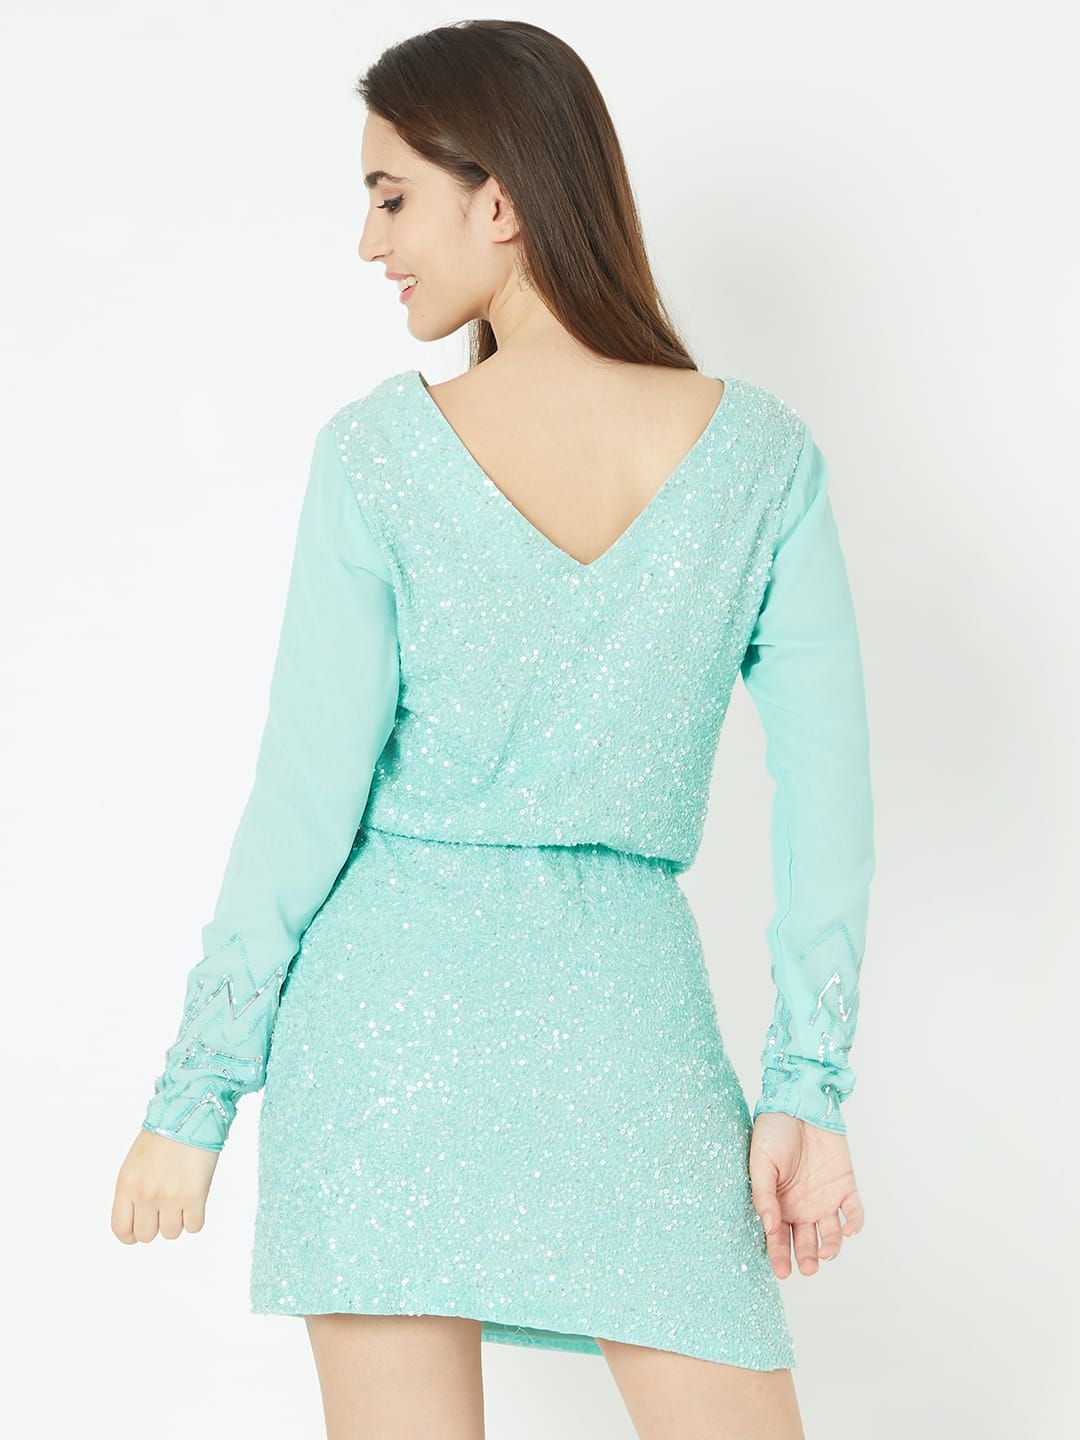 The Ice Blue Kaftan Dresses for Women - Reema Anand Label